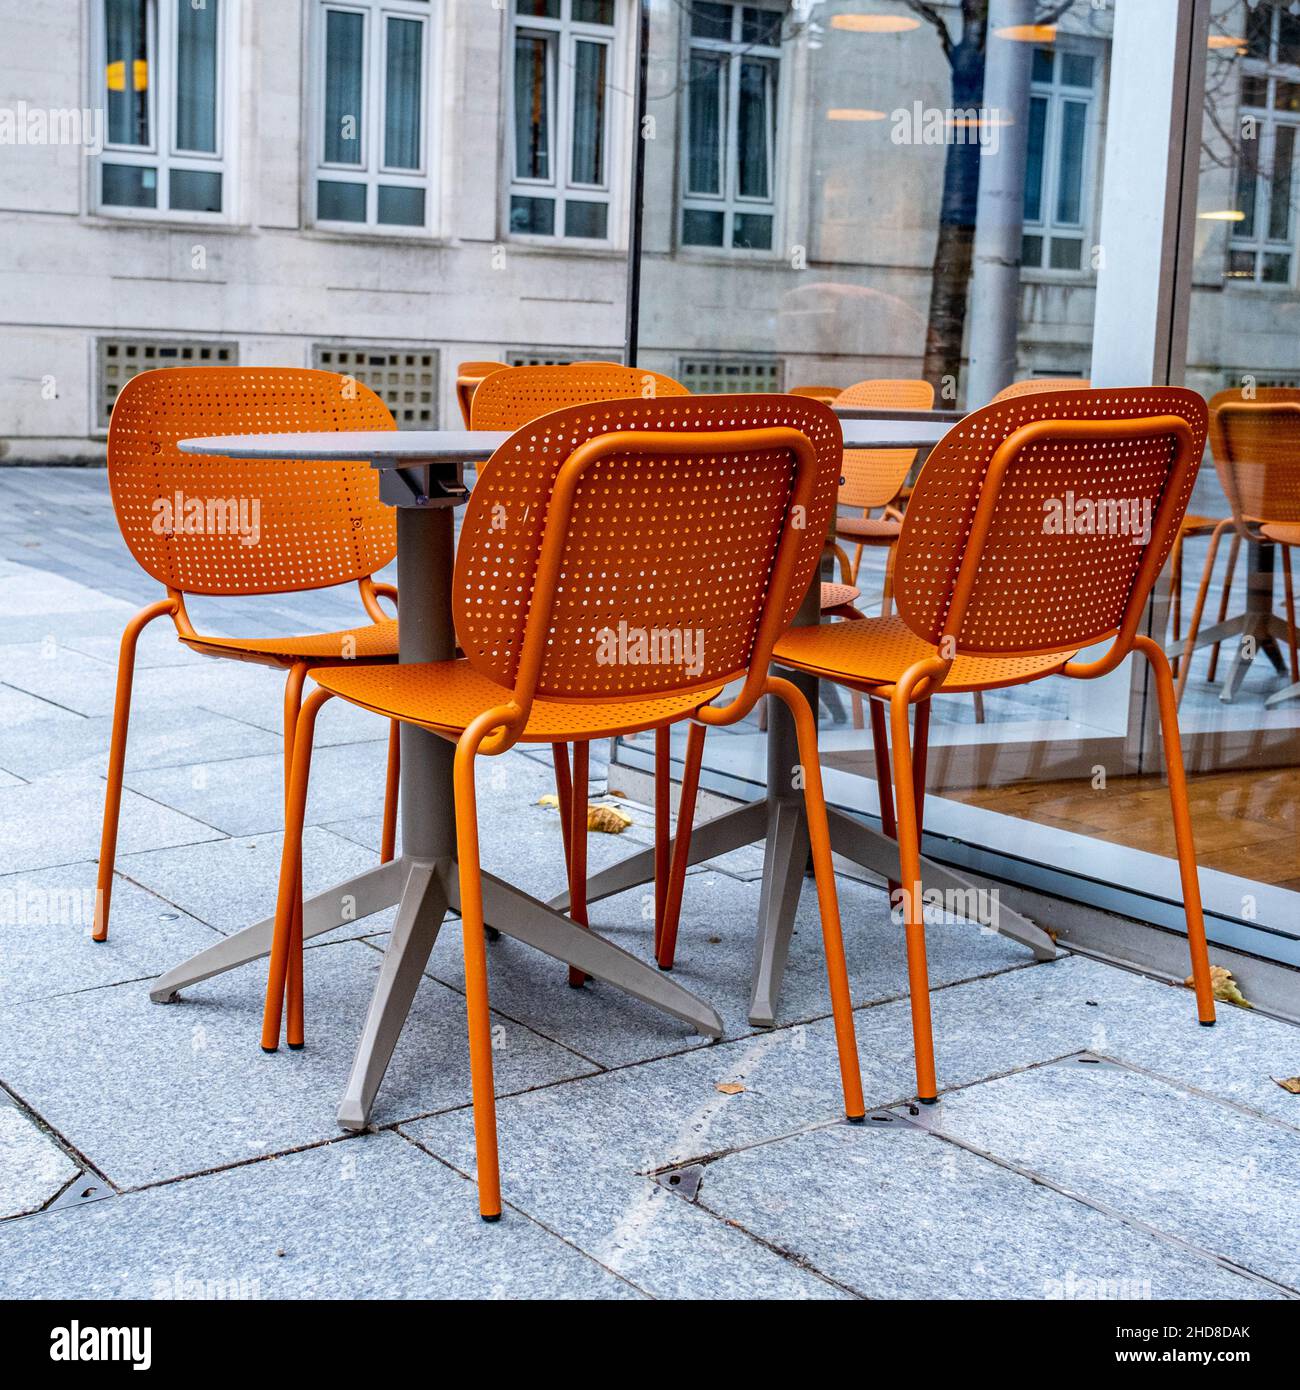 London England UK January 02 2022, Colourful Orange Table And Chairs Outside A Leon Fast Food Restaurant In Southbank London Stock Photo